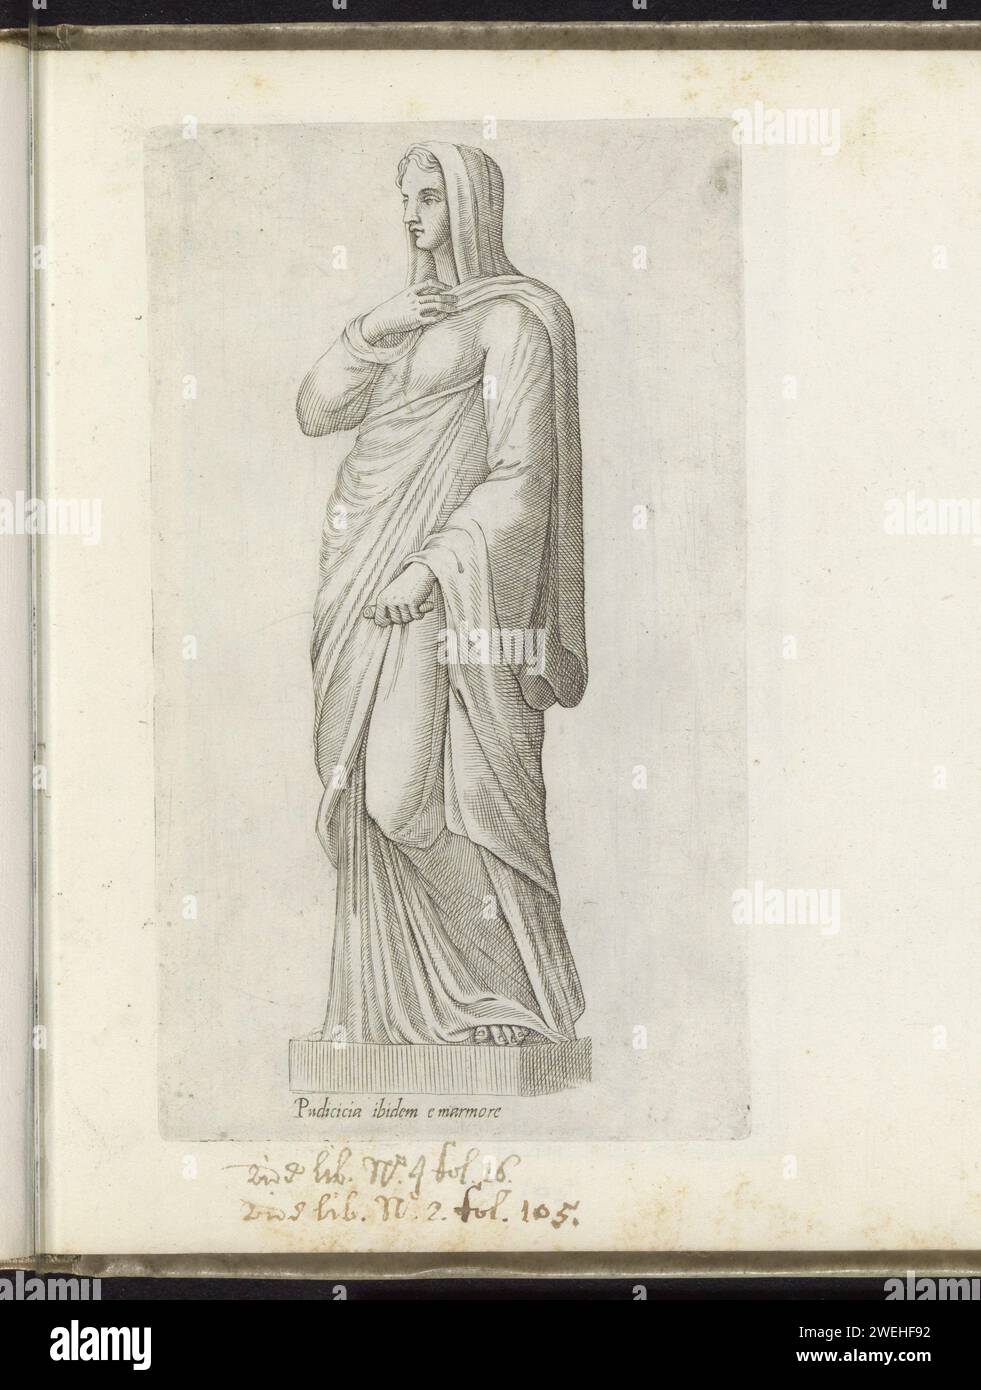 Sculpture of Pudicitia, Anonymous, 1600 - 1699 print Caption in Latin. Print is part of an album.  paper engraving piece of sculpture, reproduction of a piece of sculpture. Pudicitia as Roman personification Stock Photo